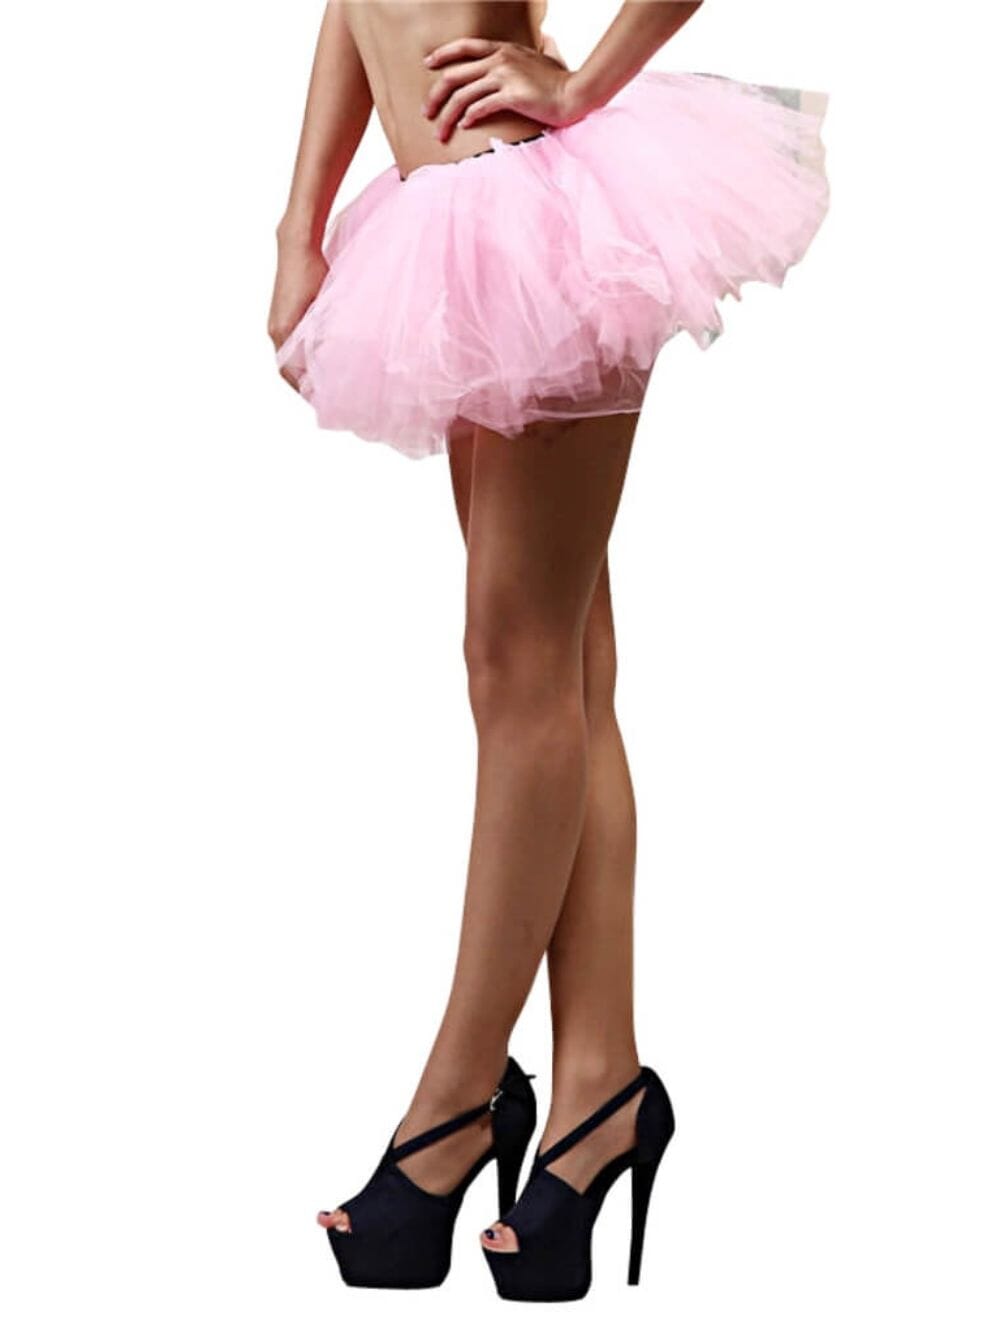 Pink - 5 Layer Tutu Skirt for Running, Dress-Up, Costumes - Sydney So Sweet